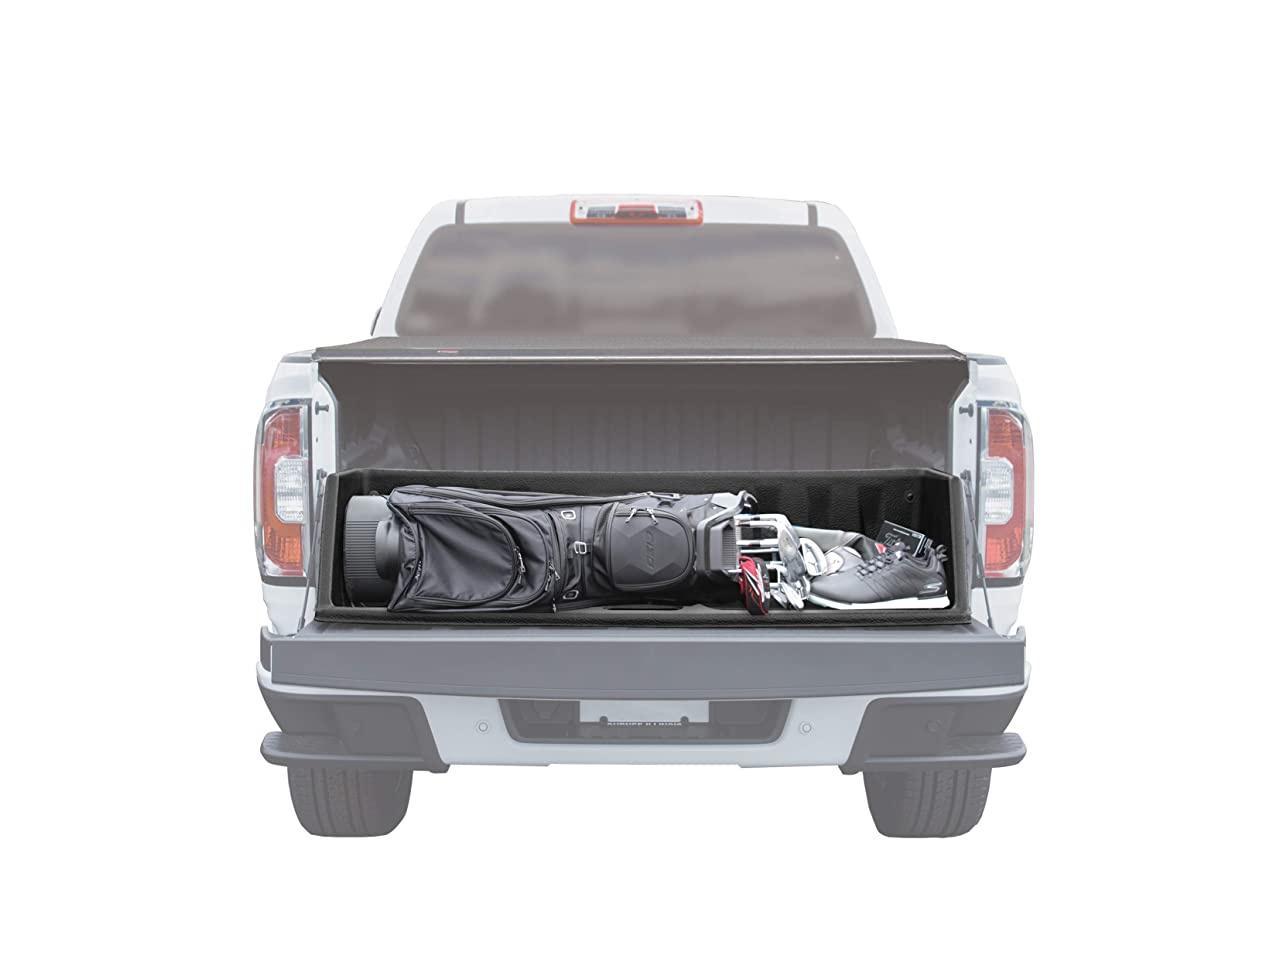 MidSize Truck Cargo Box a Truck Bed Organizer for Carrying and securing